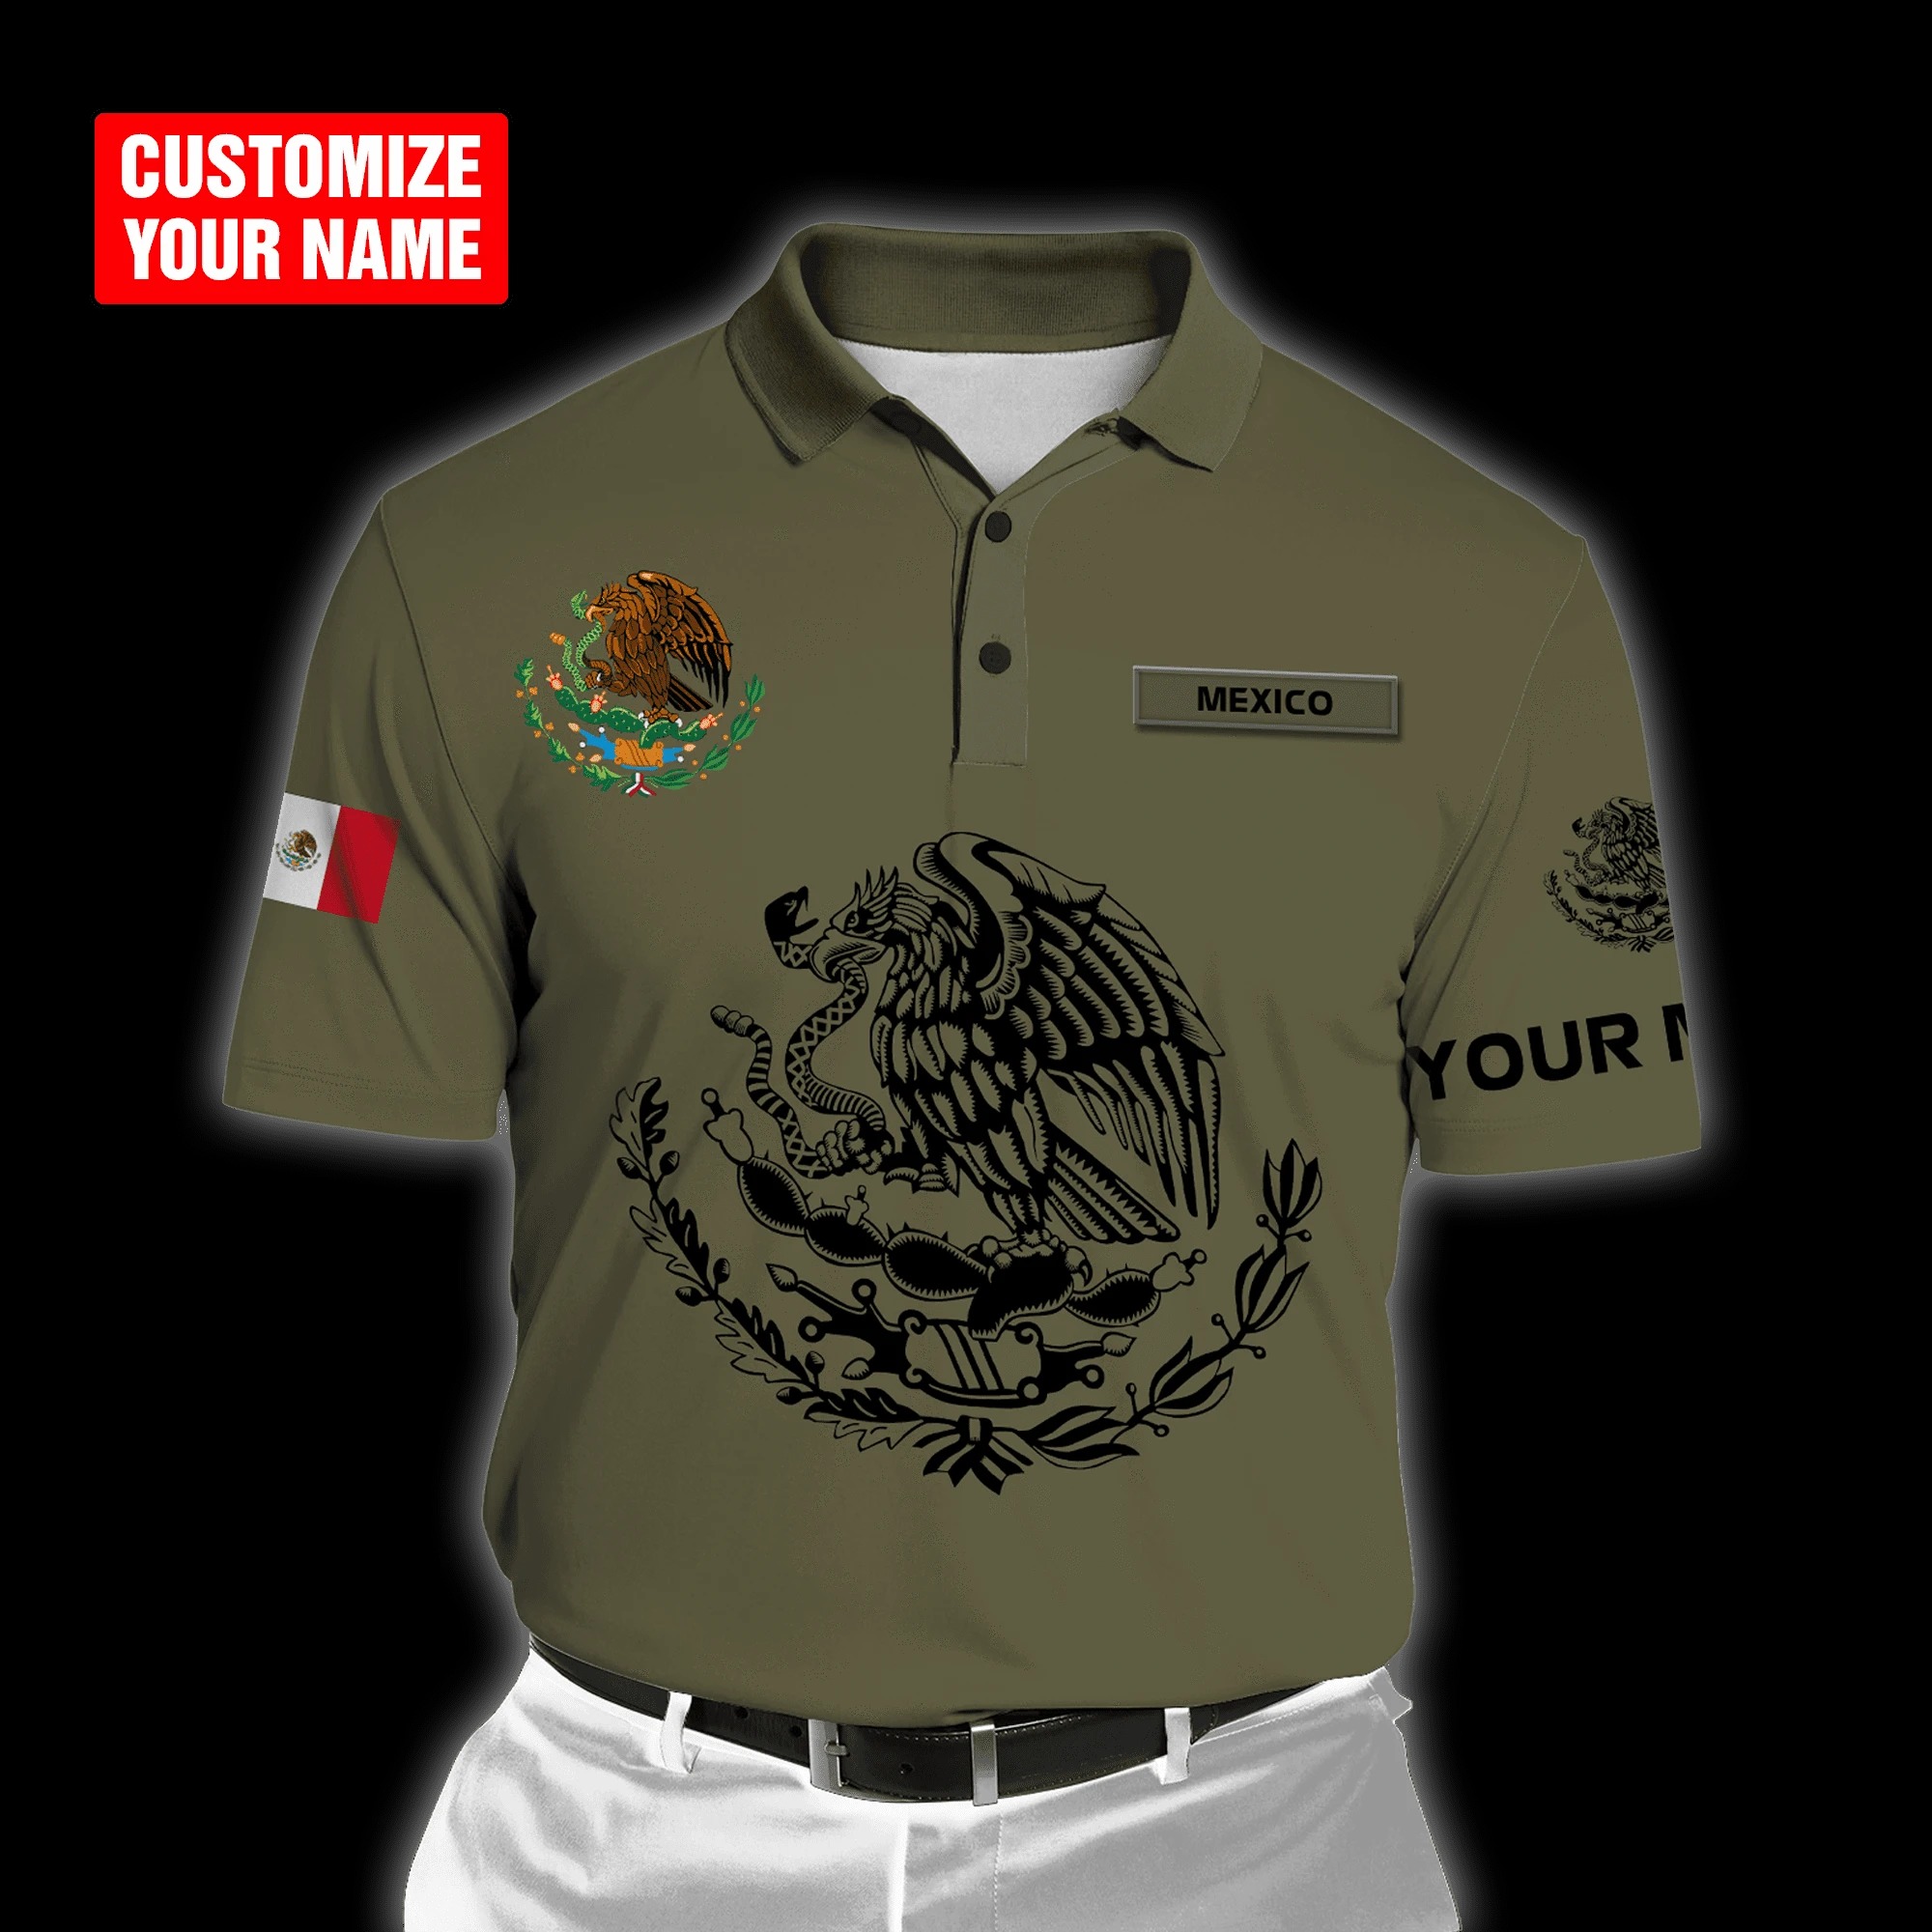 Mexican flag custom personalized Polo shirt – LIMITED EDITION